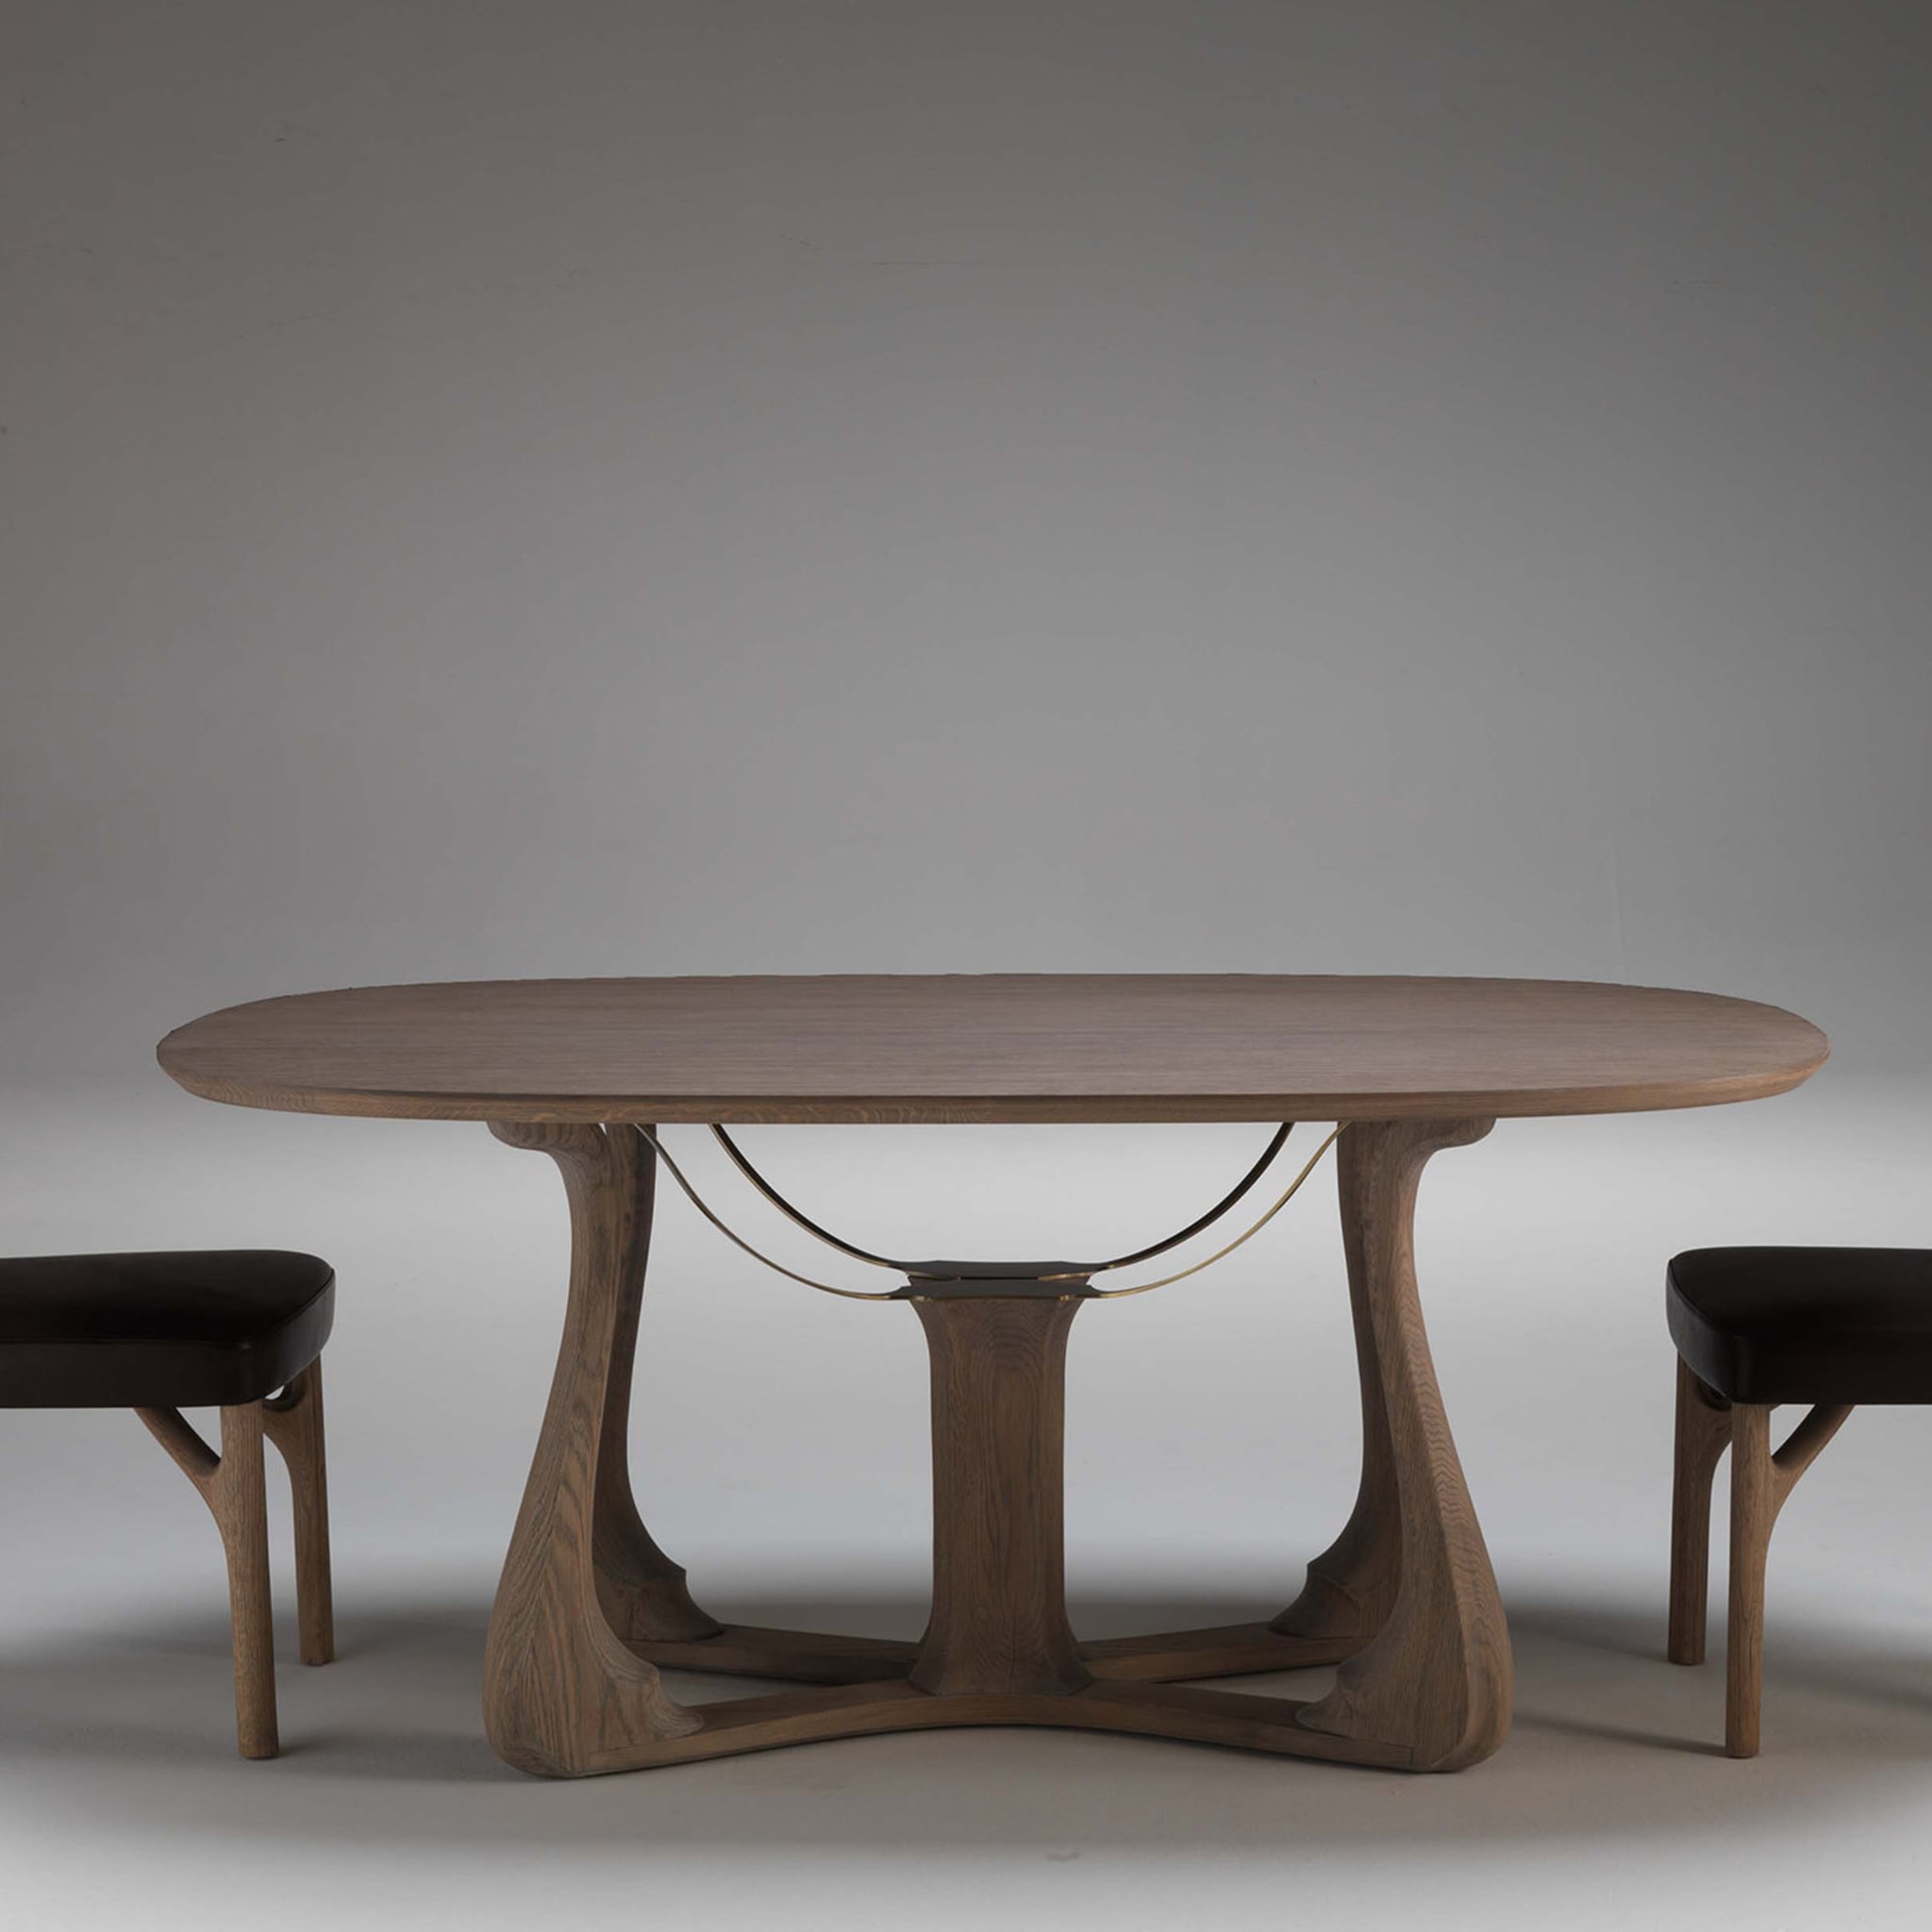 Arpa Dining Table by Giopato & Coombes - Alternative view 1